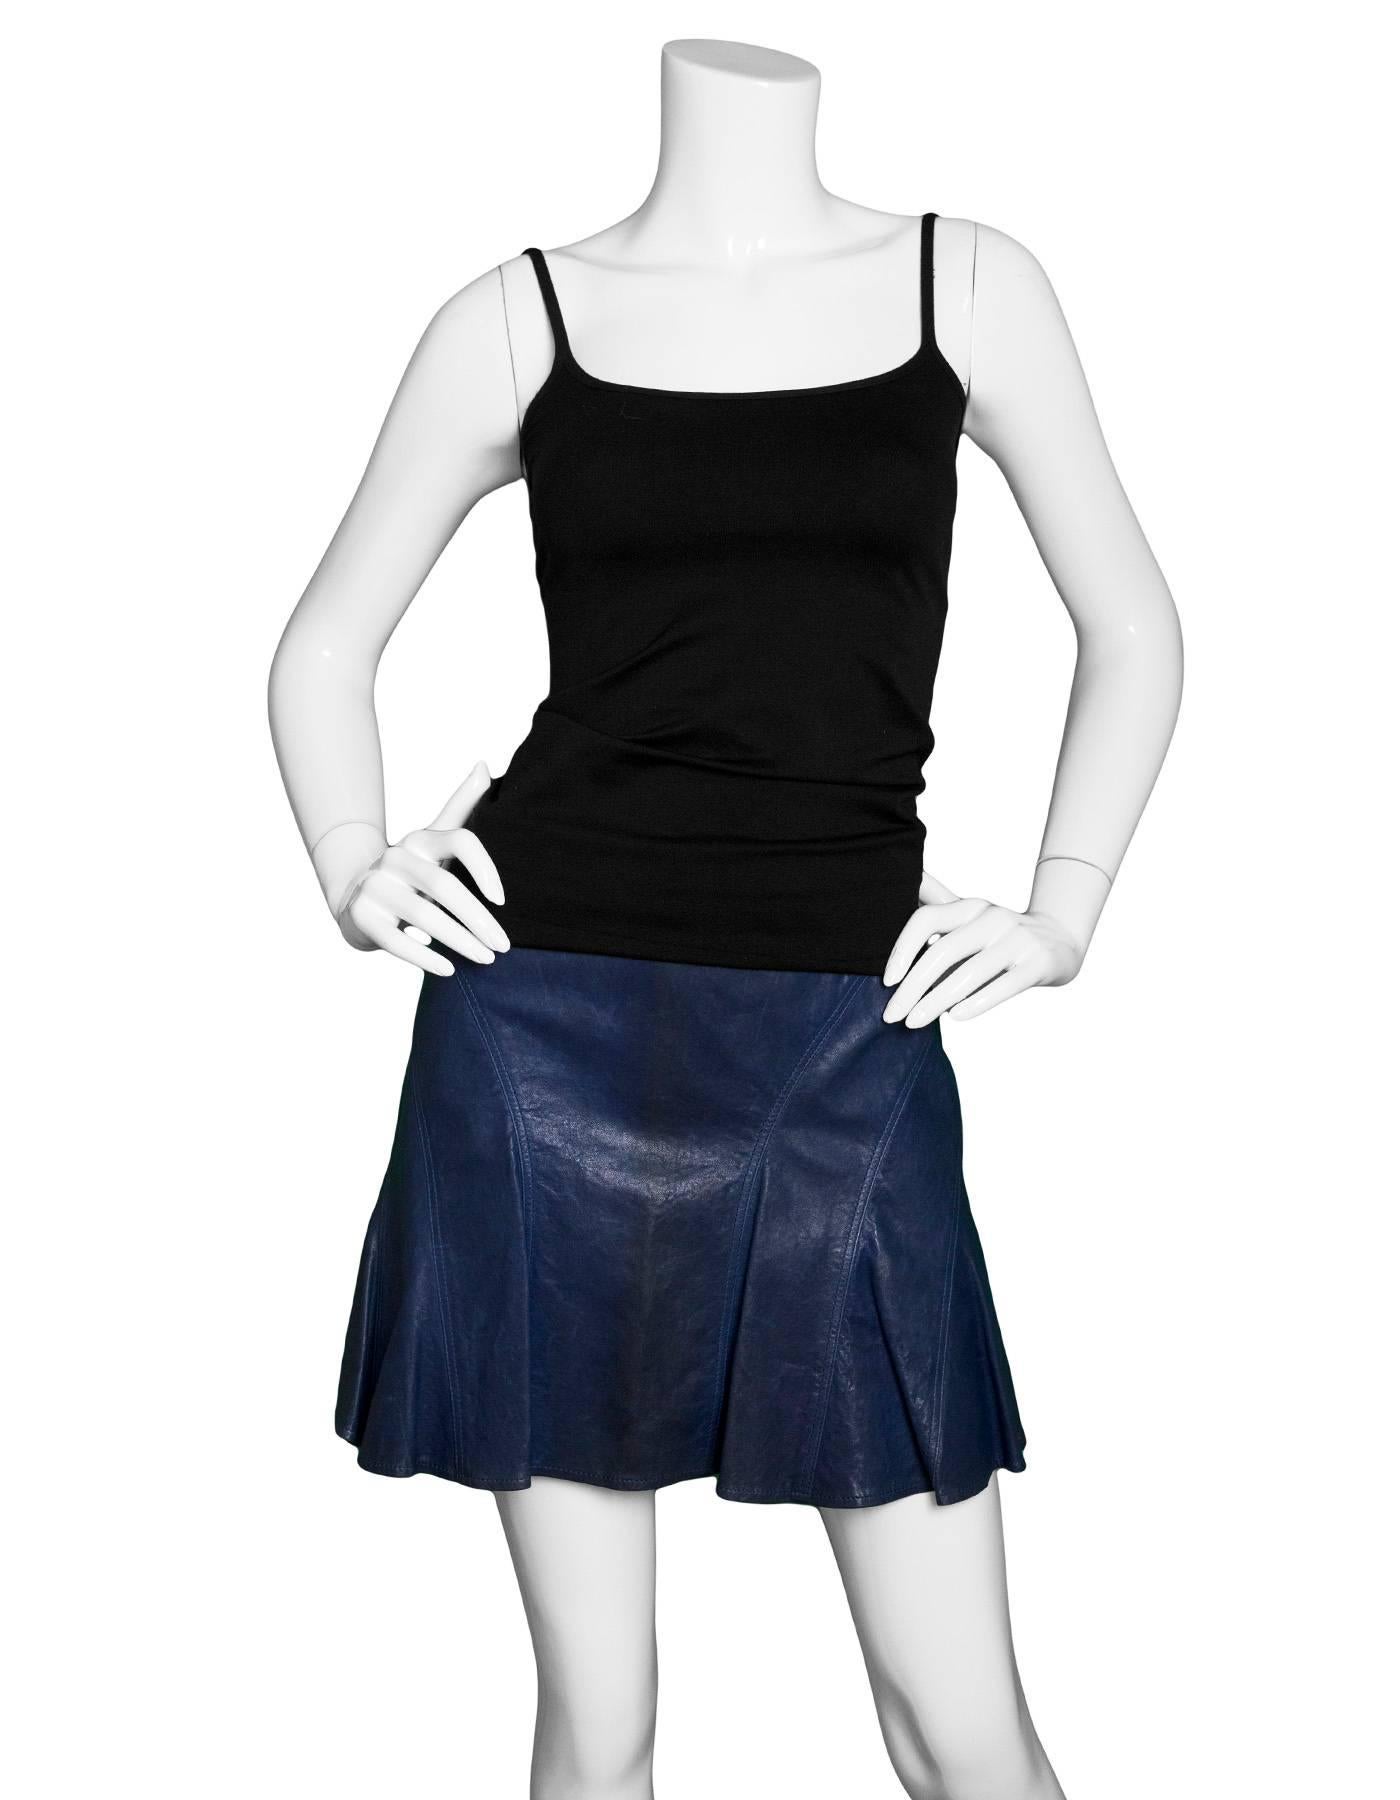 10 Crosby Derek Lam Blue Leather Flared Skirt Sz 0

Made In: China
Color: Blue
Composition: 100% lamb leather
Closure/Opening: Side zip closure
Overall Condition: Very good pre-owned condition with the exception of some discoloration and marks